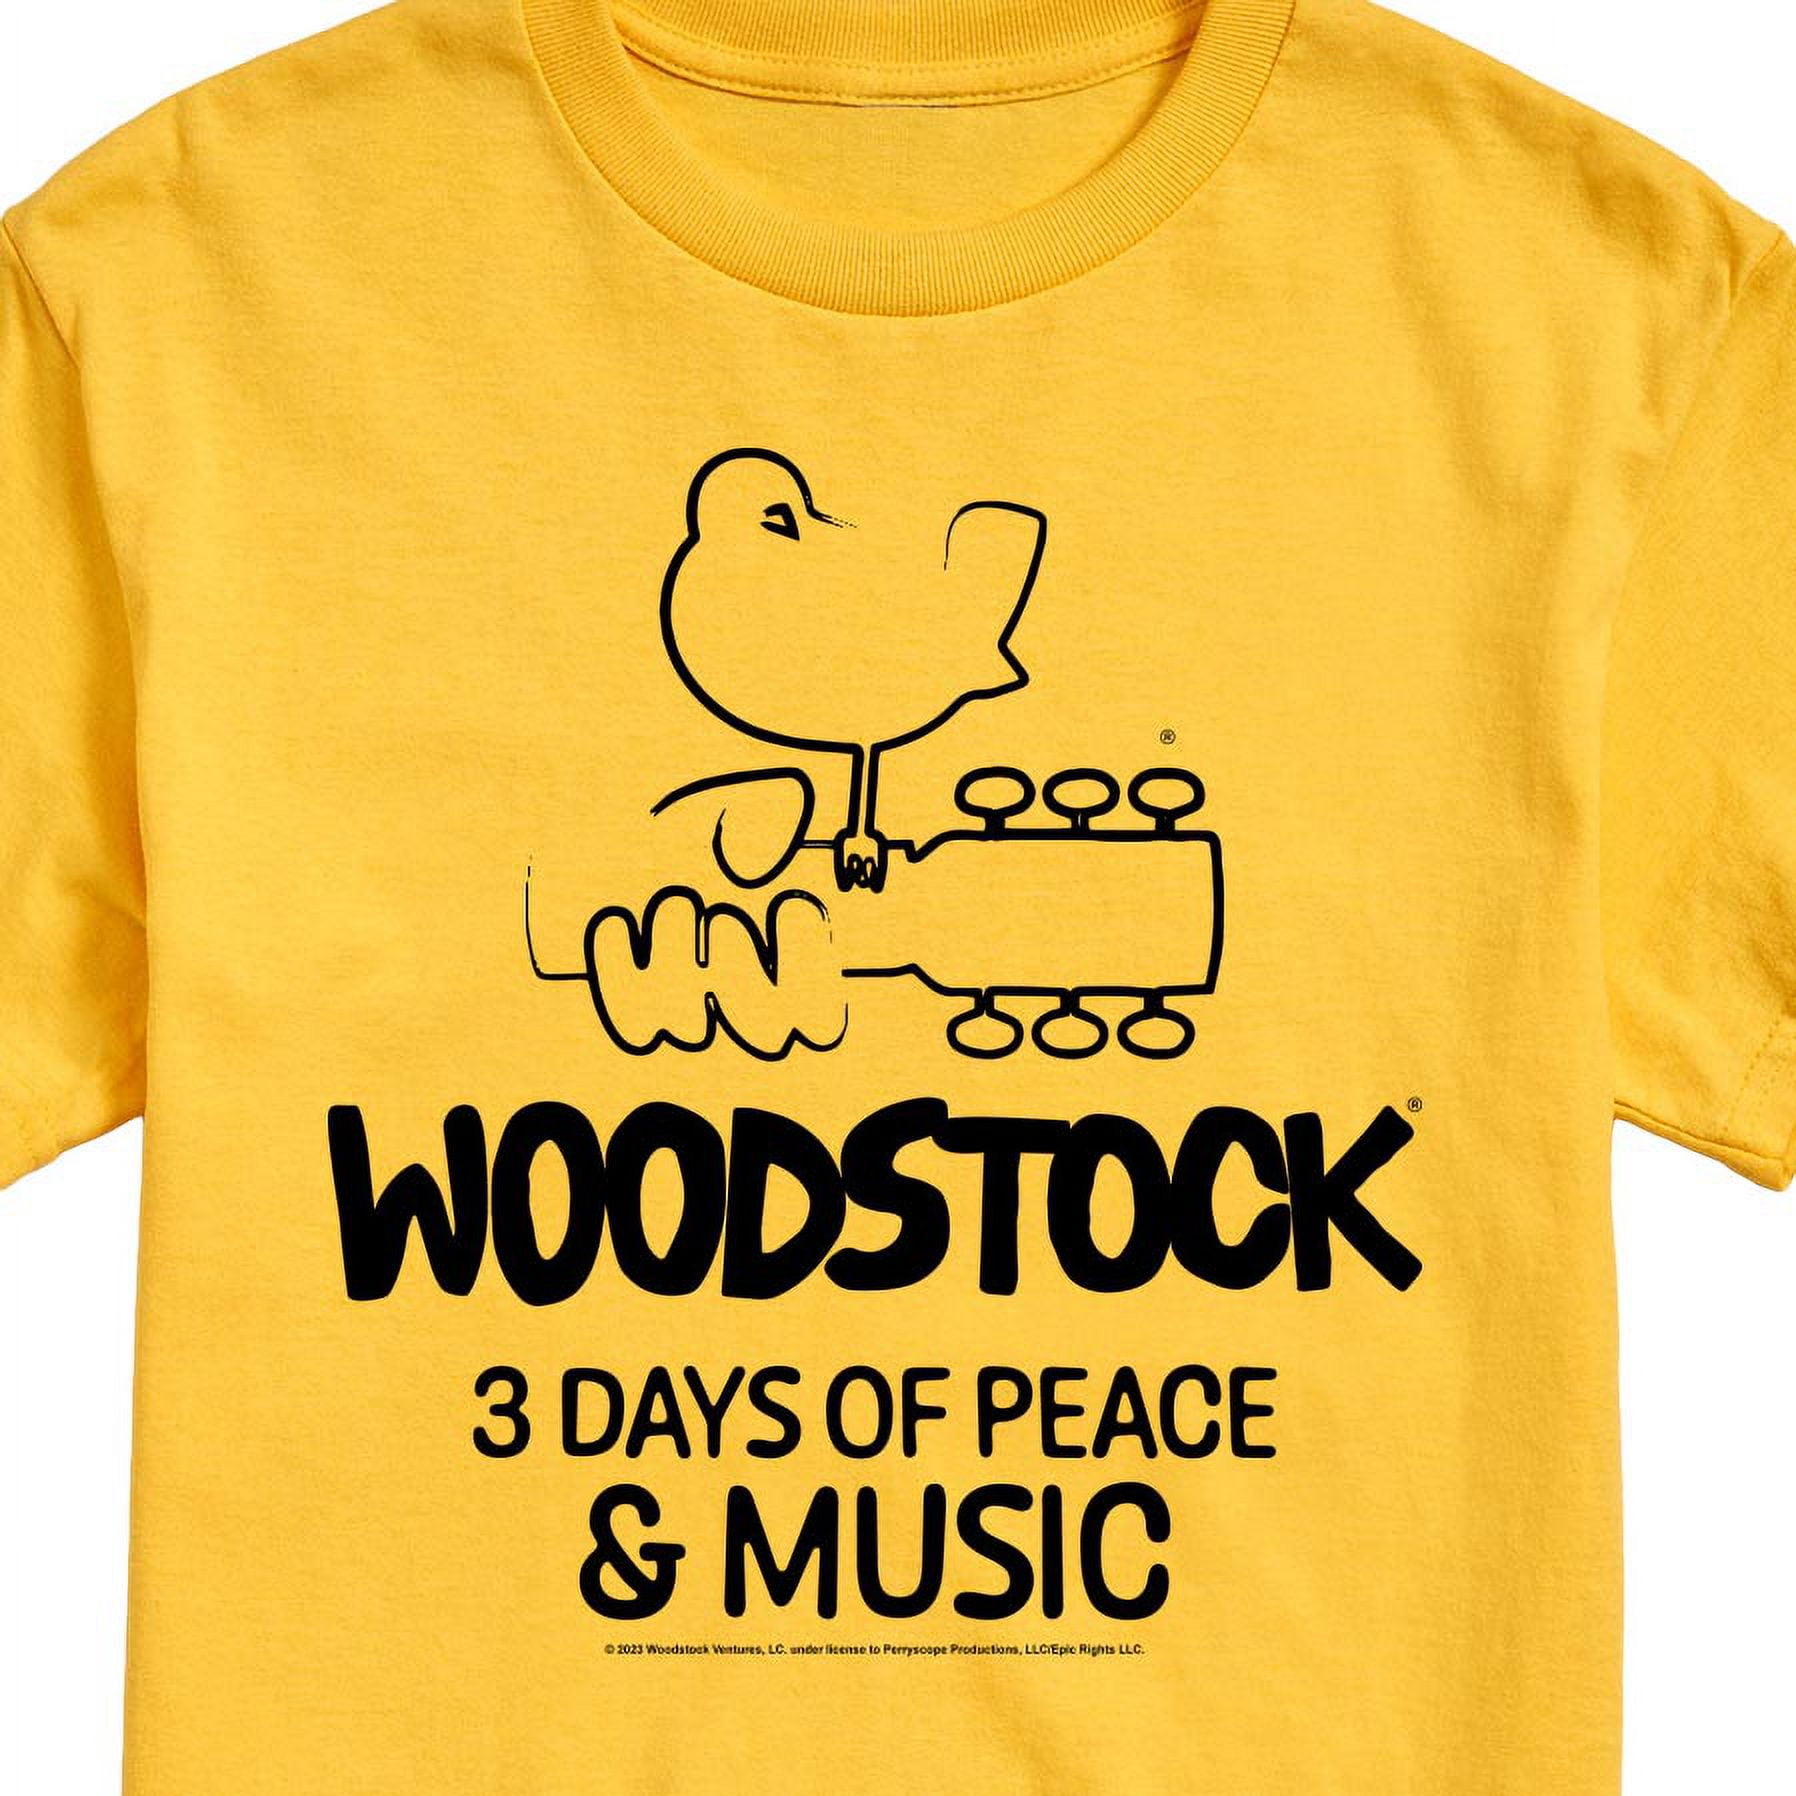 Woodstock - 3 Days of Peace & Music - Outline Drawing - Men's Short Sleeve  Graphic T-Shirt